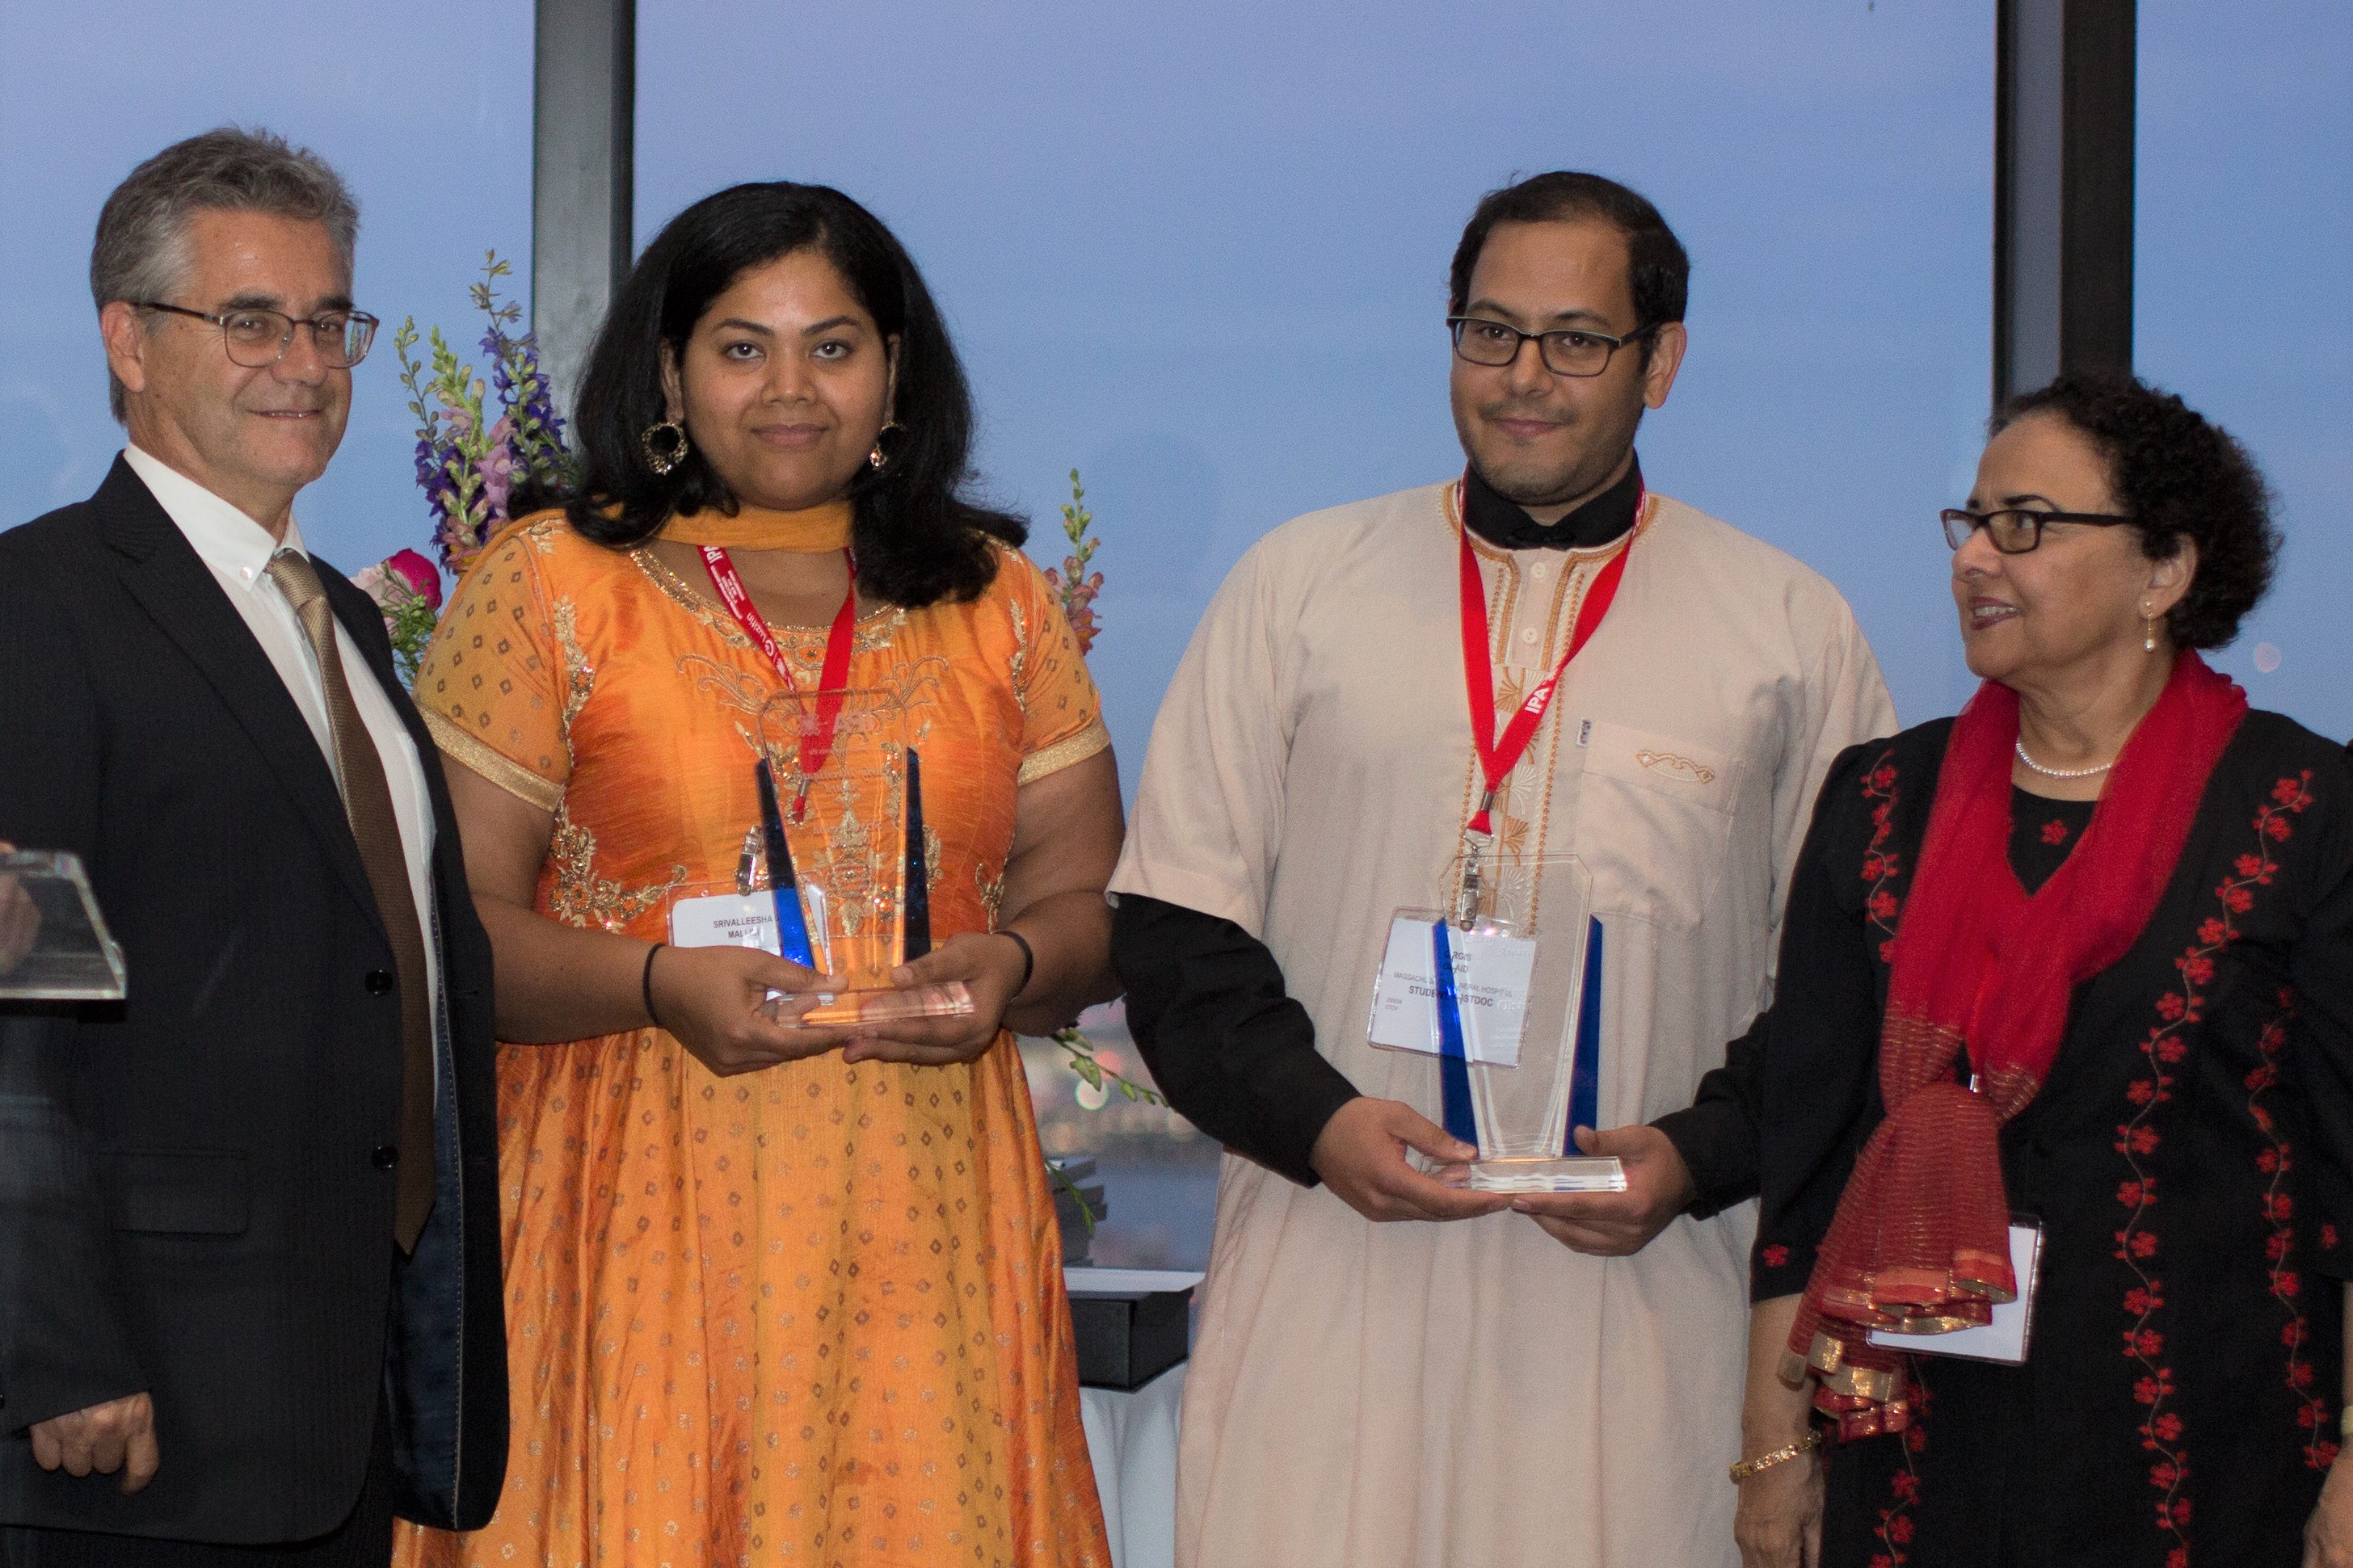 Dr. Srivalleesha Mallidi (center-left) and Dr. Girgis Obaid (center-right) receiving 2019 Early Investigator Awards from IPA President, Dr. Luis Arnaut (left) and IPA Past-President, Dr. Tayyaba Hassan (right).